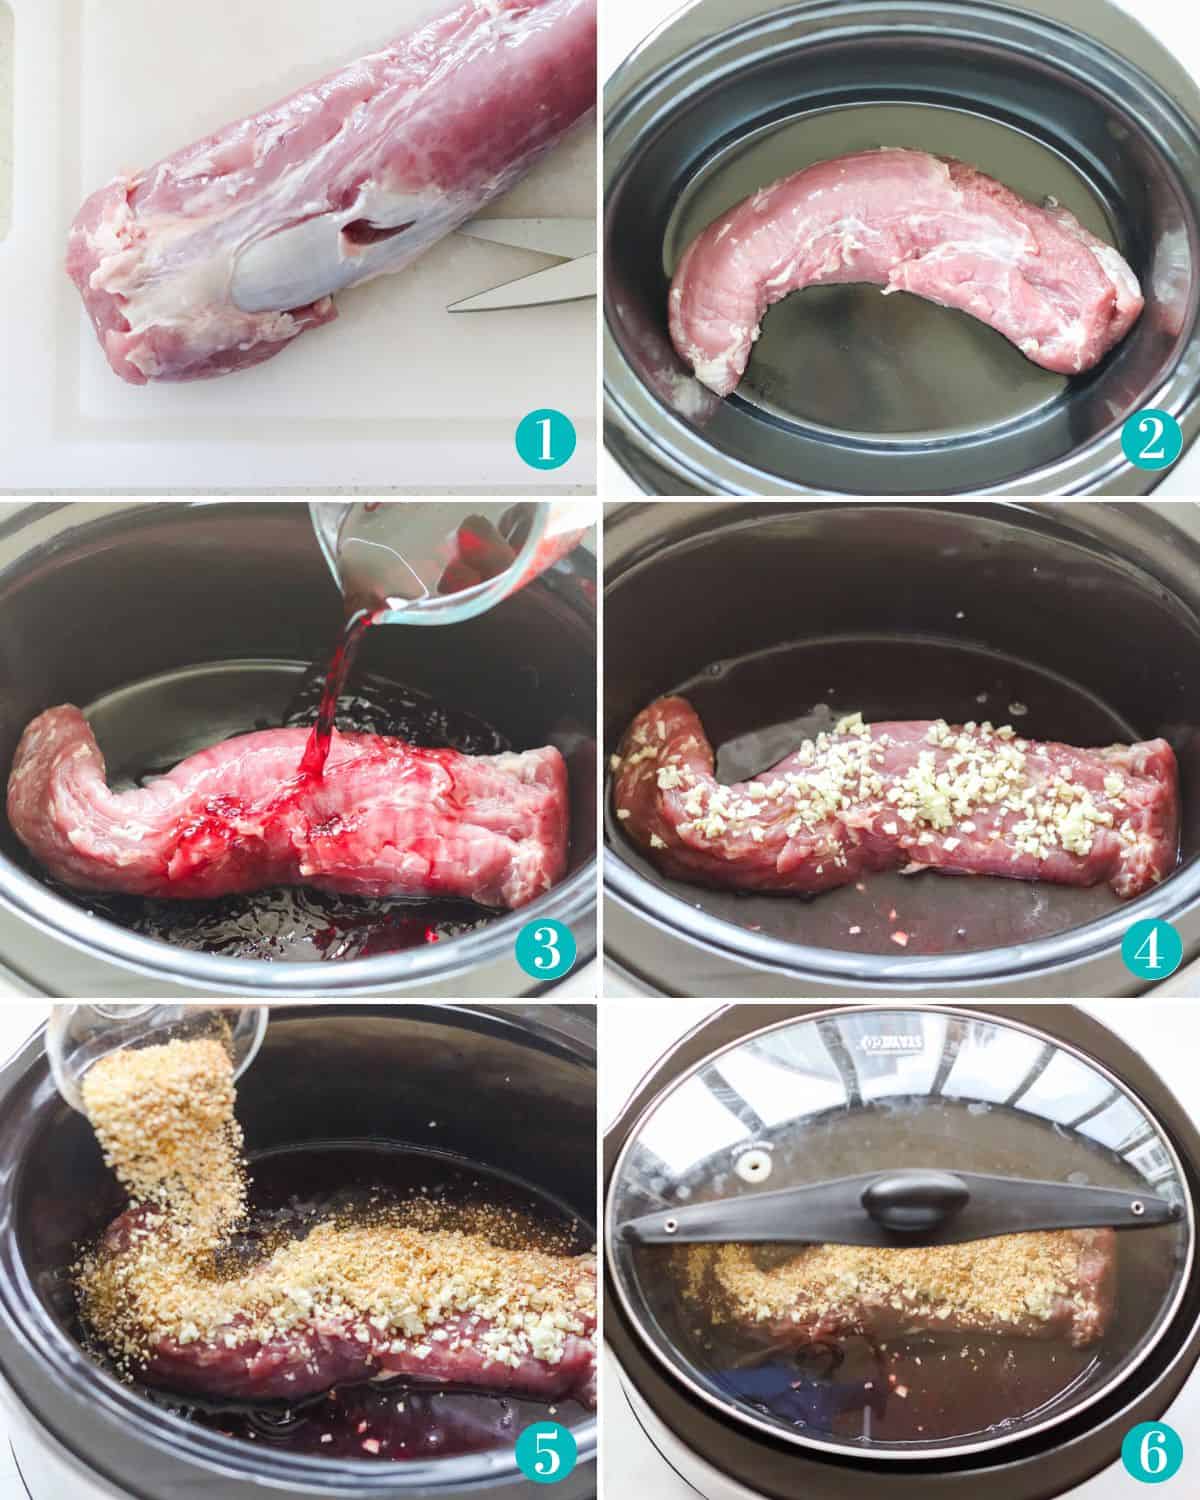 six photo collage with silverskin being cut off pork tenderloin, pork tenderloin in a crock pot, wine being poured over pork, garlic covering the pork, spices sprinkled over pork, and the cover on the slow cooker.